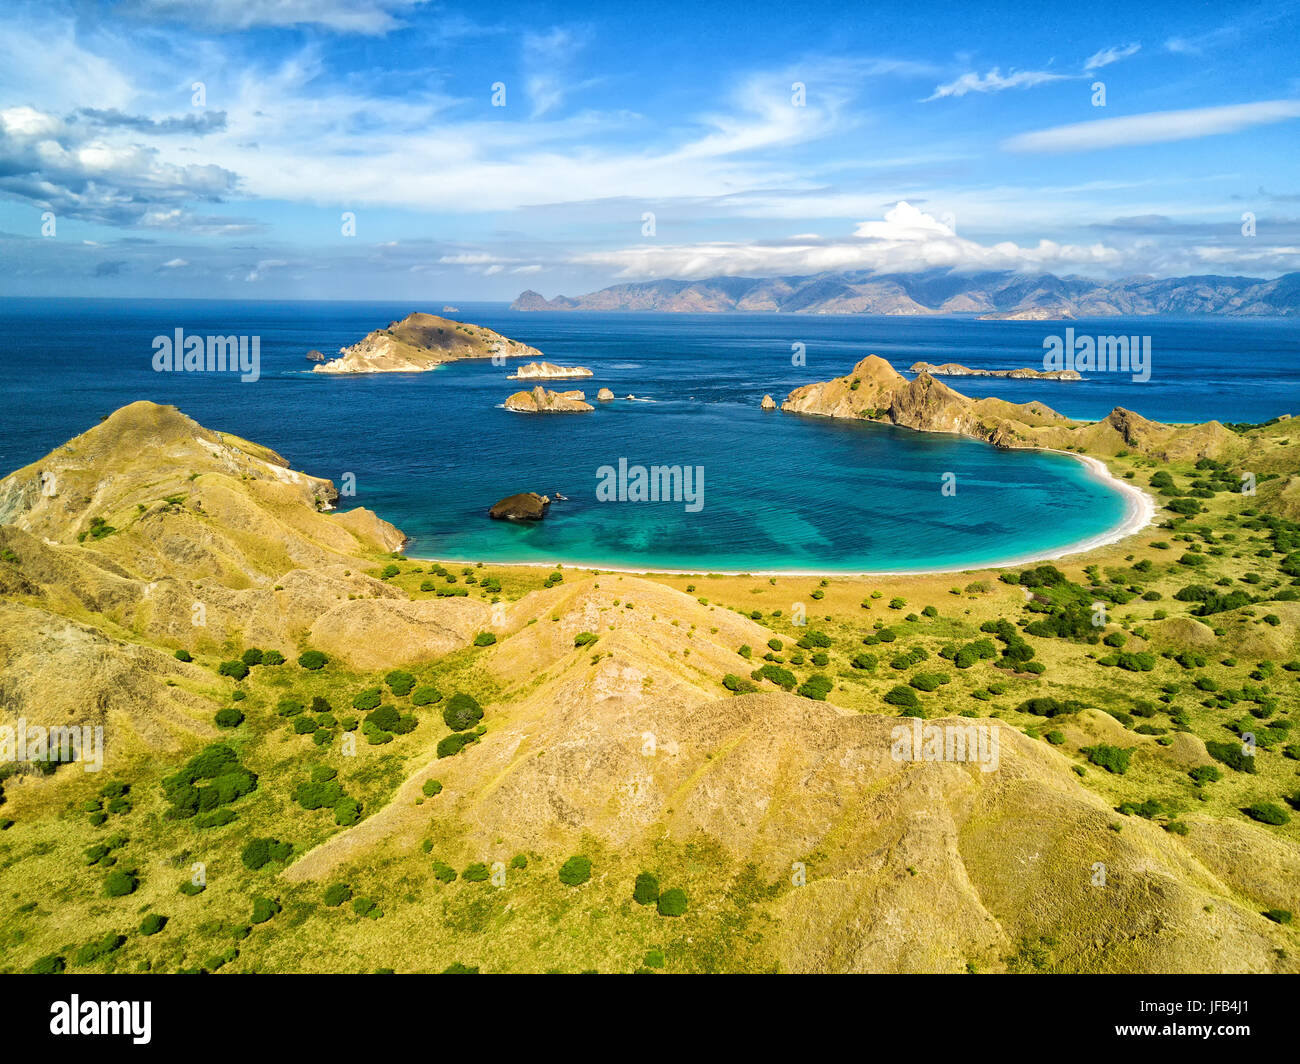 Aerial view of a small bay on Pulau Padar island in between Komodo and Rinca Islands near Labuan Bajo in Indonesia. Stock Photo